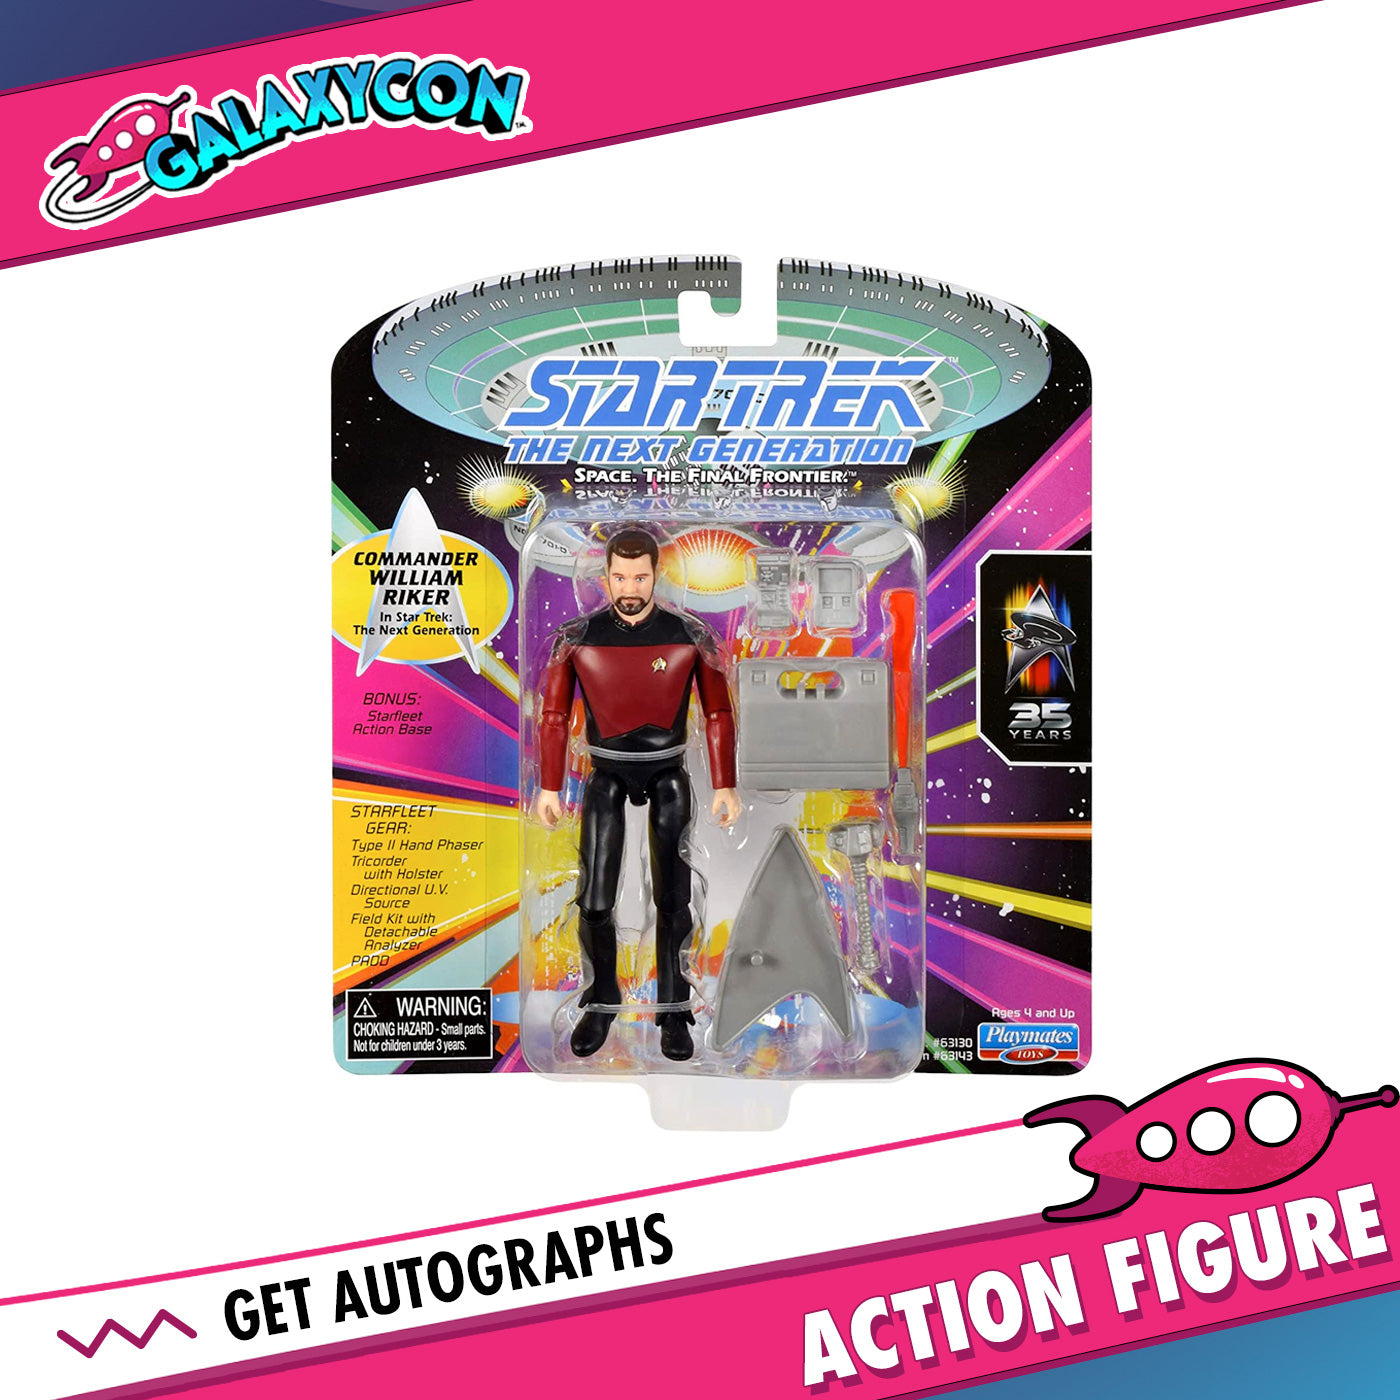 Jonathan Frakes: Autograph Signing on an Action Figure, November 5th